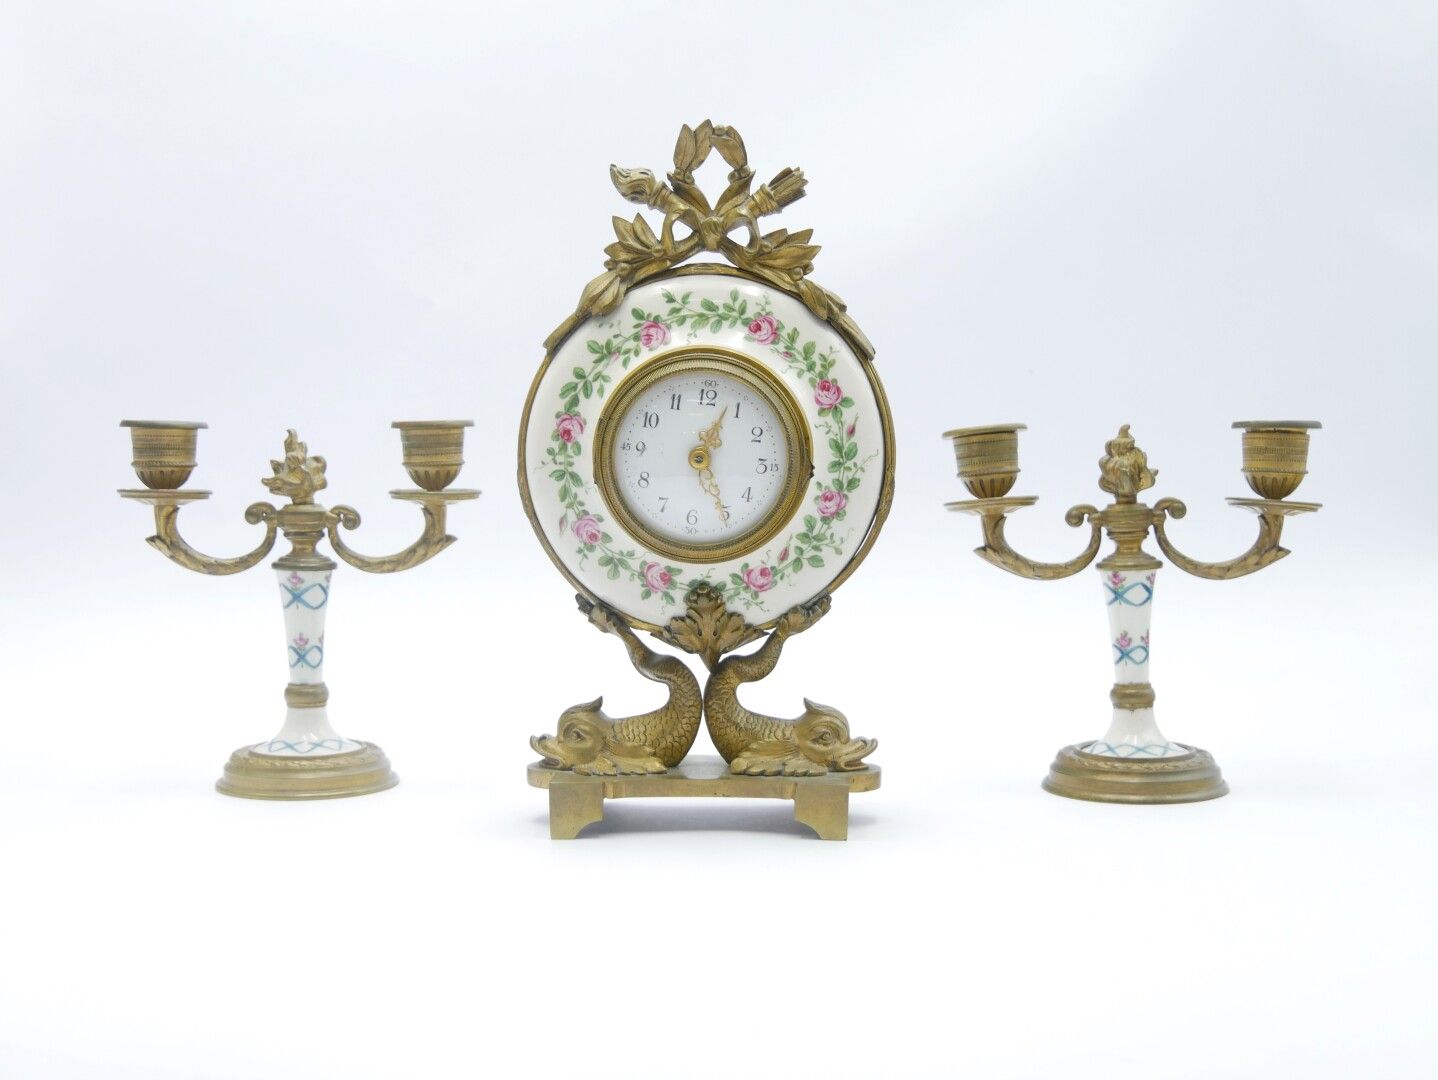 Null late 19th century

Mantelpiece including a porcelain clock with painted ros&hellip;